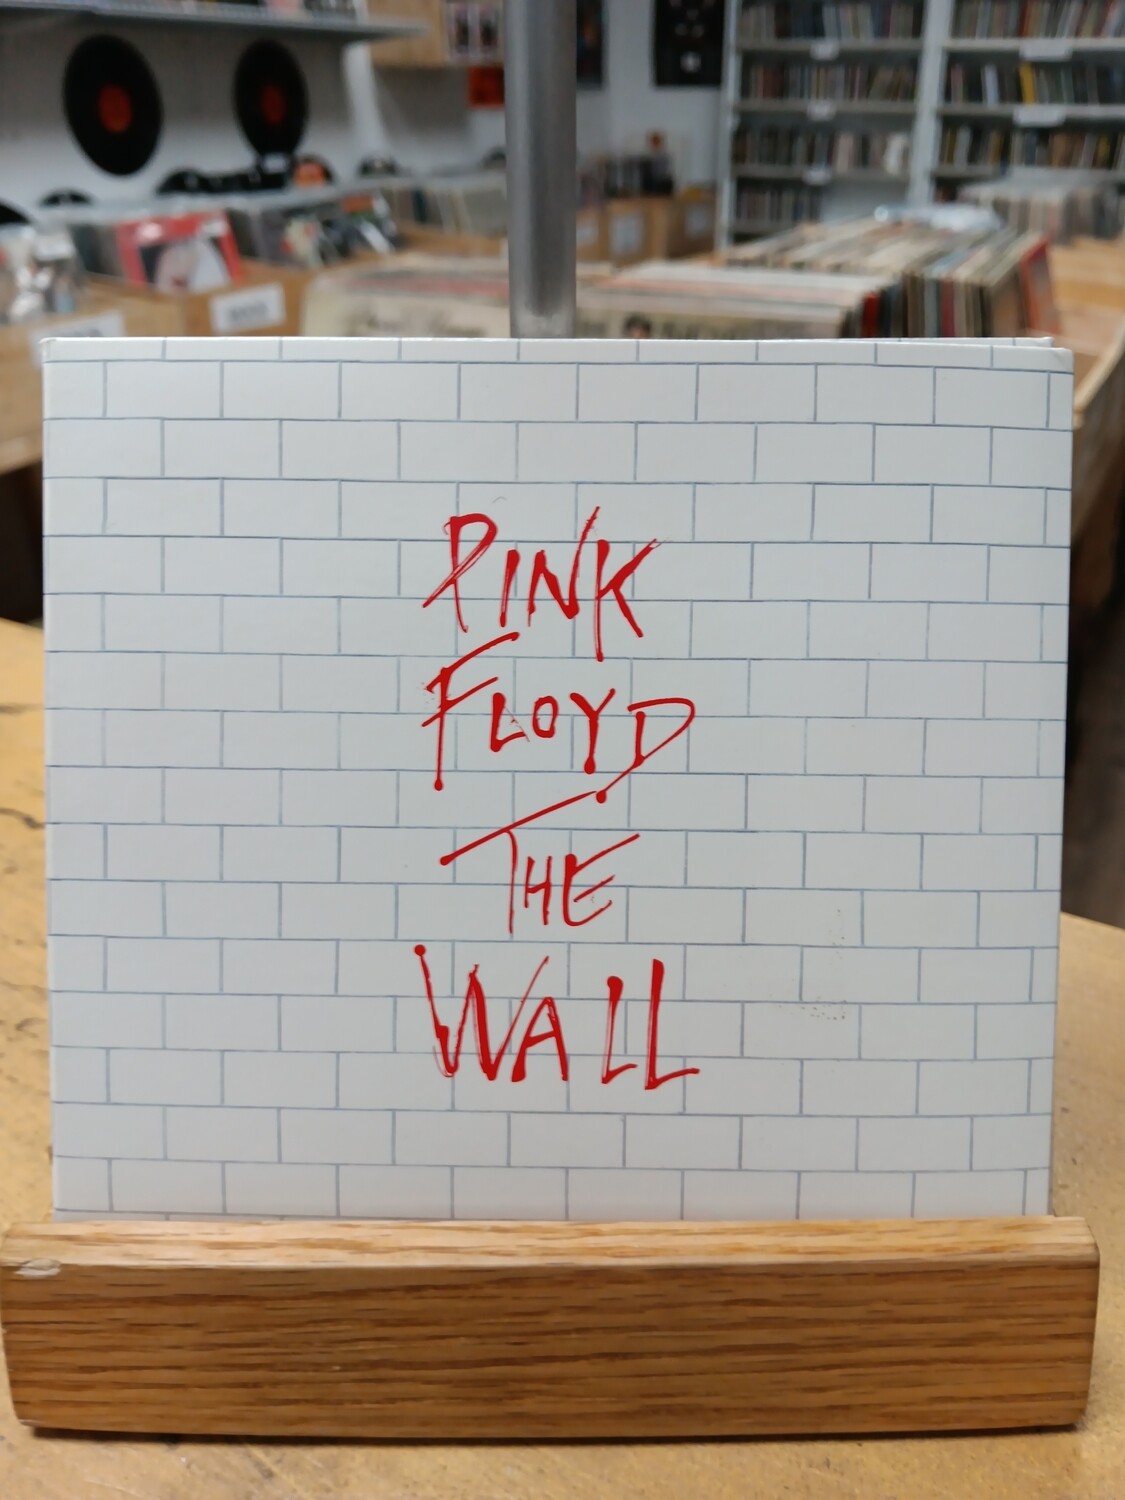 PINK FLOYD - The wall (CD)